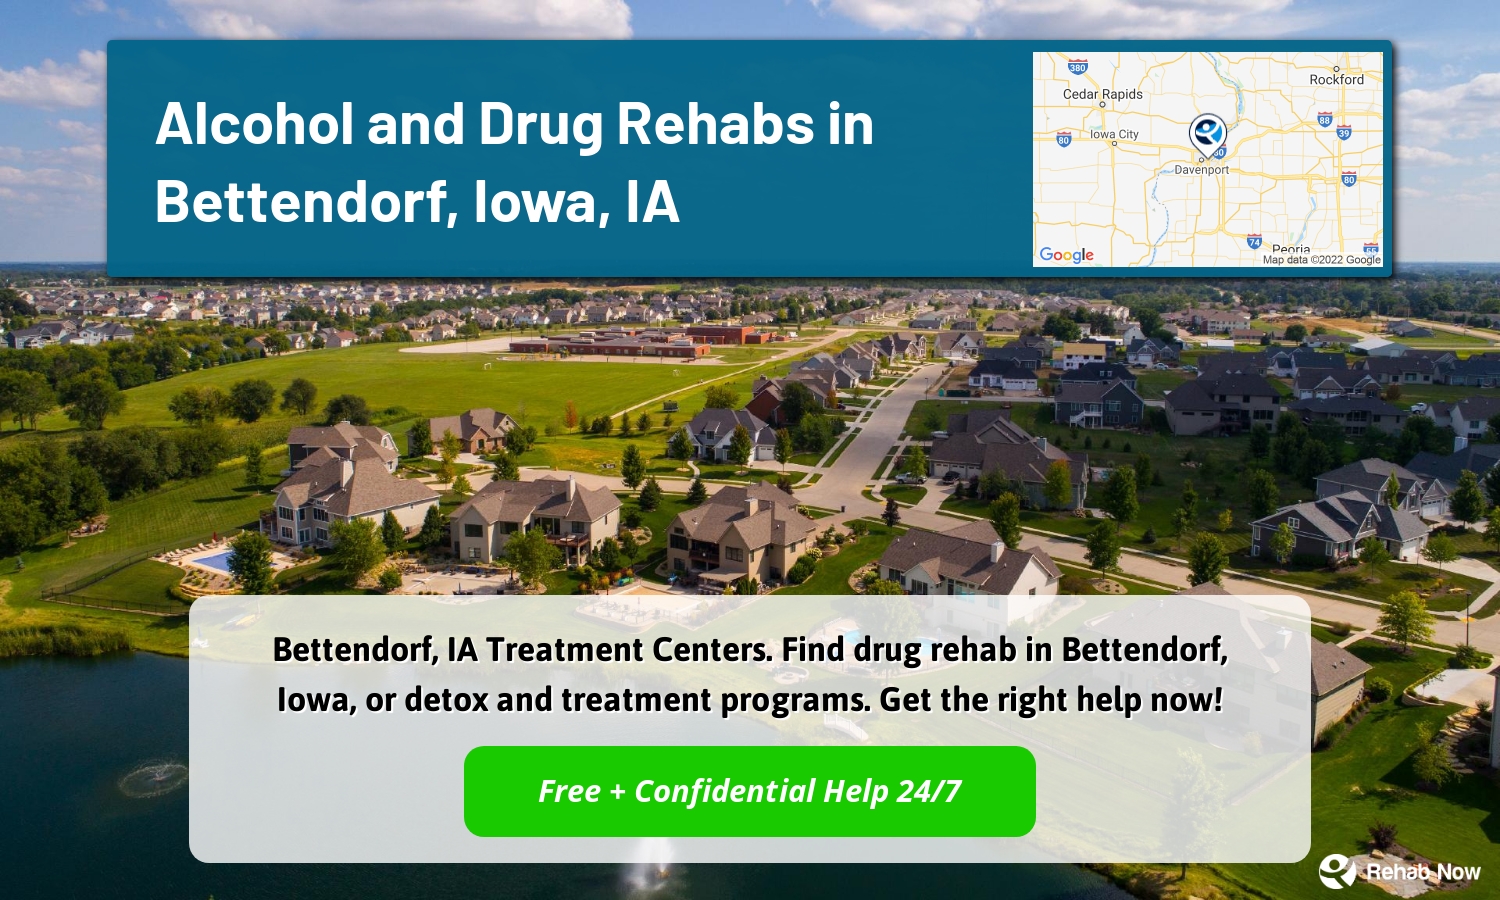 Bettendorf, IA Treatment Centers. Find drug rehab in Bettendorf, Iowa, or detox and treatment programs. Get the right help now!